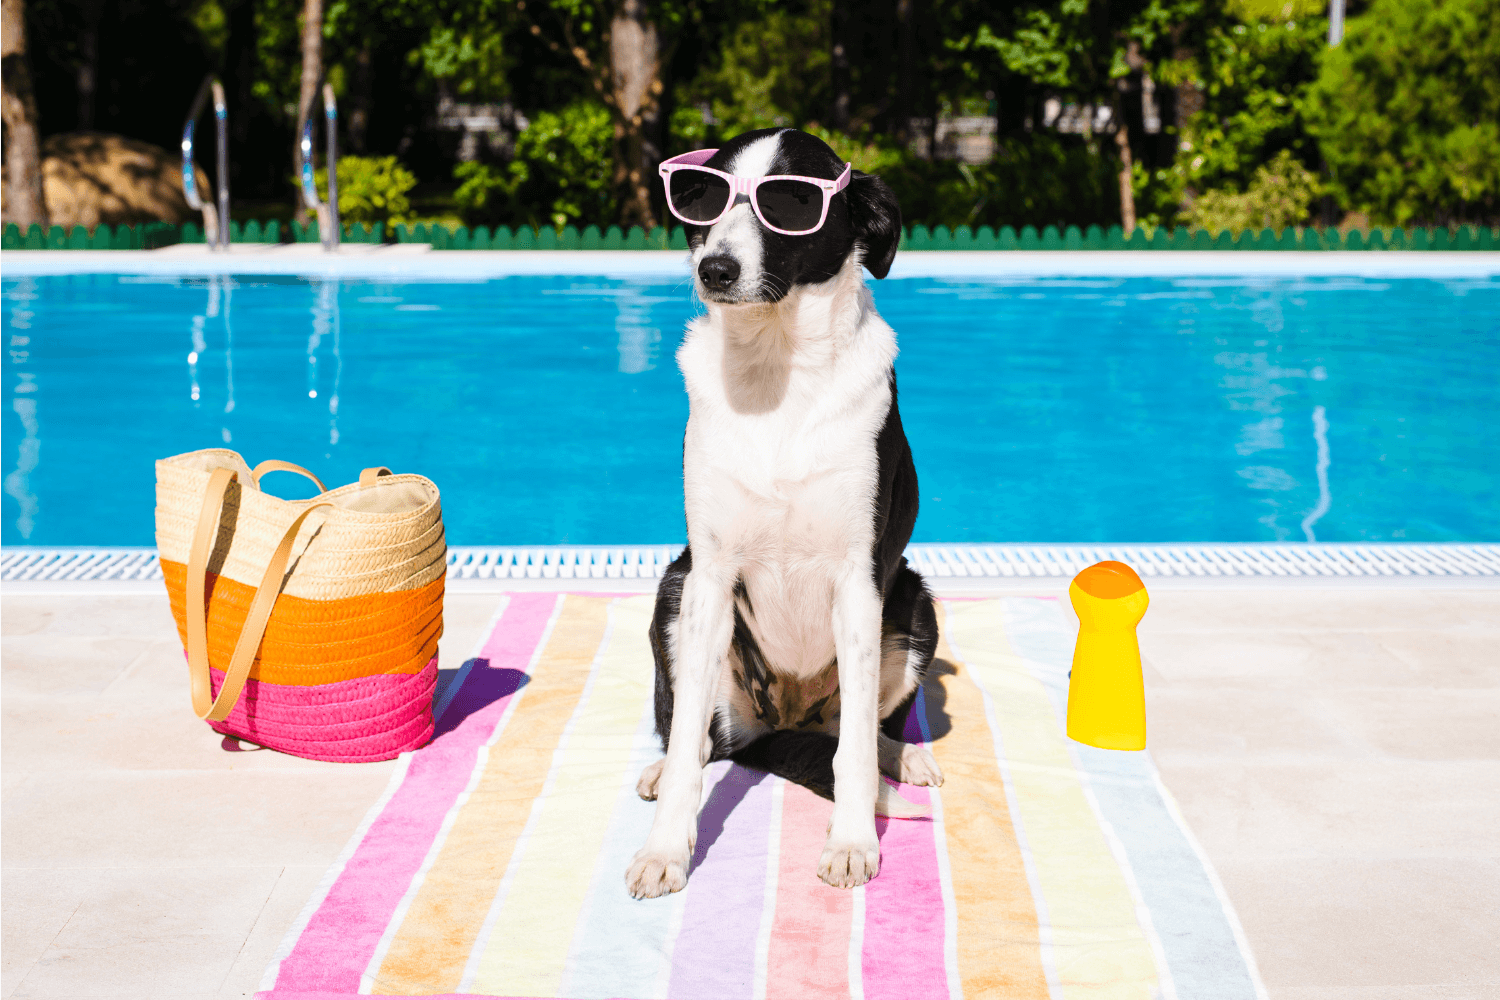 Dog with sunglasses sitting on top of a striped beach towel in front of a pool, with a beach bag and sunblock on each side